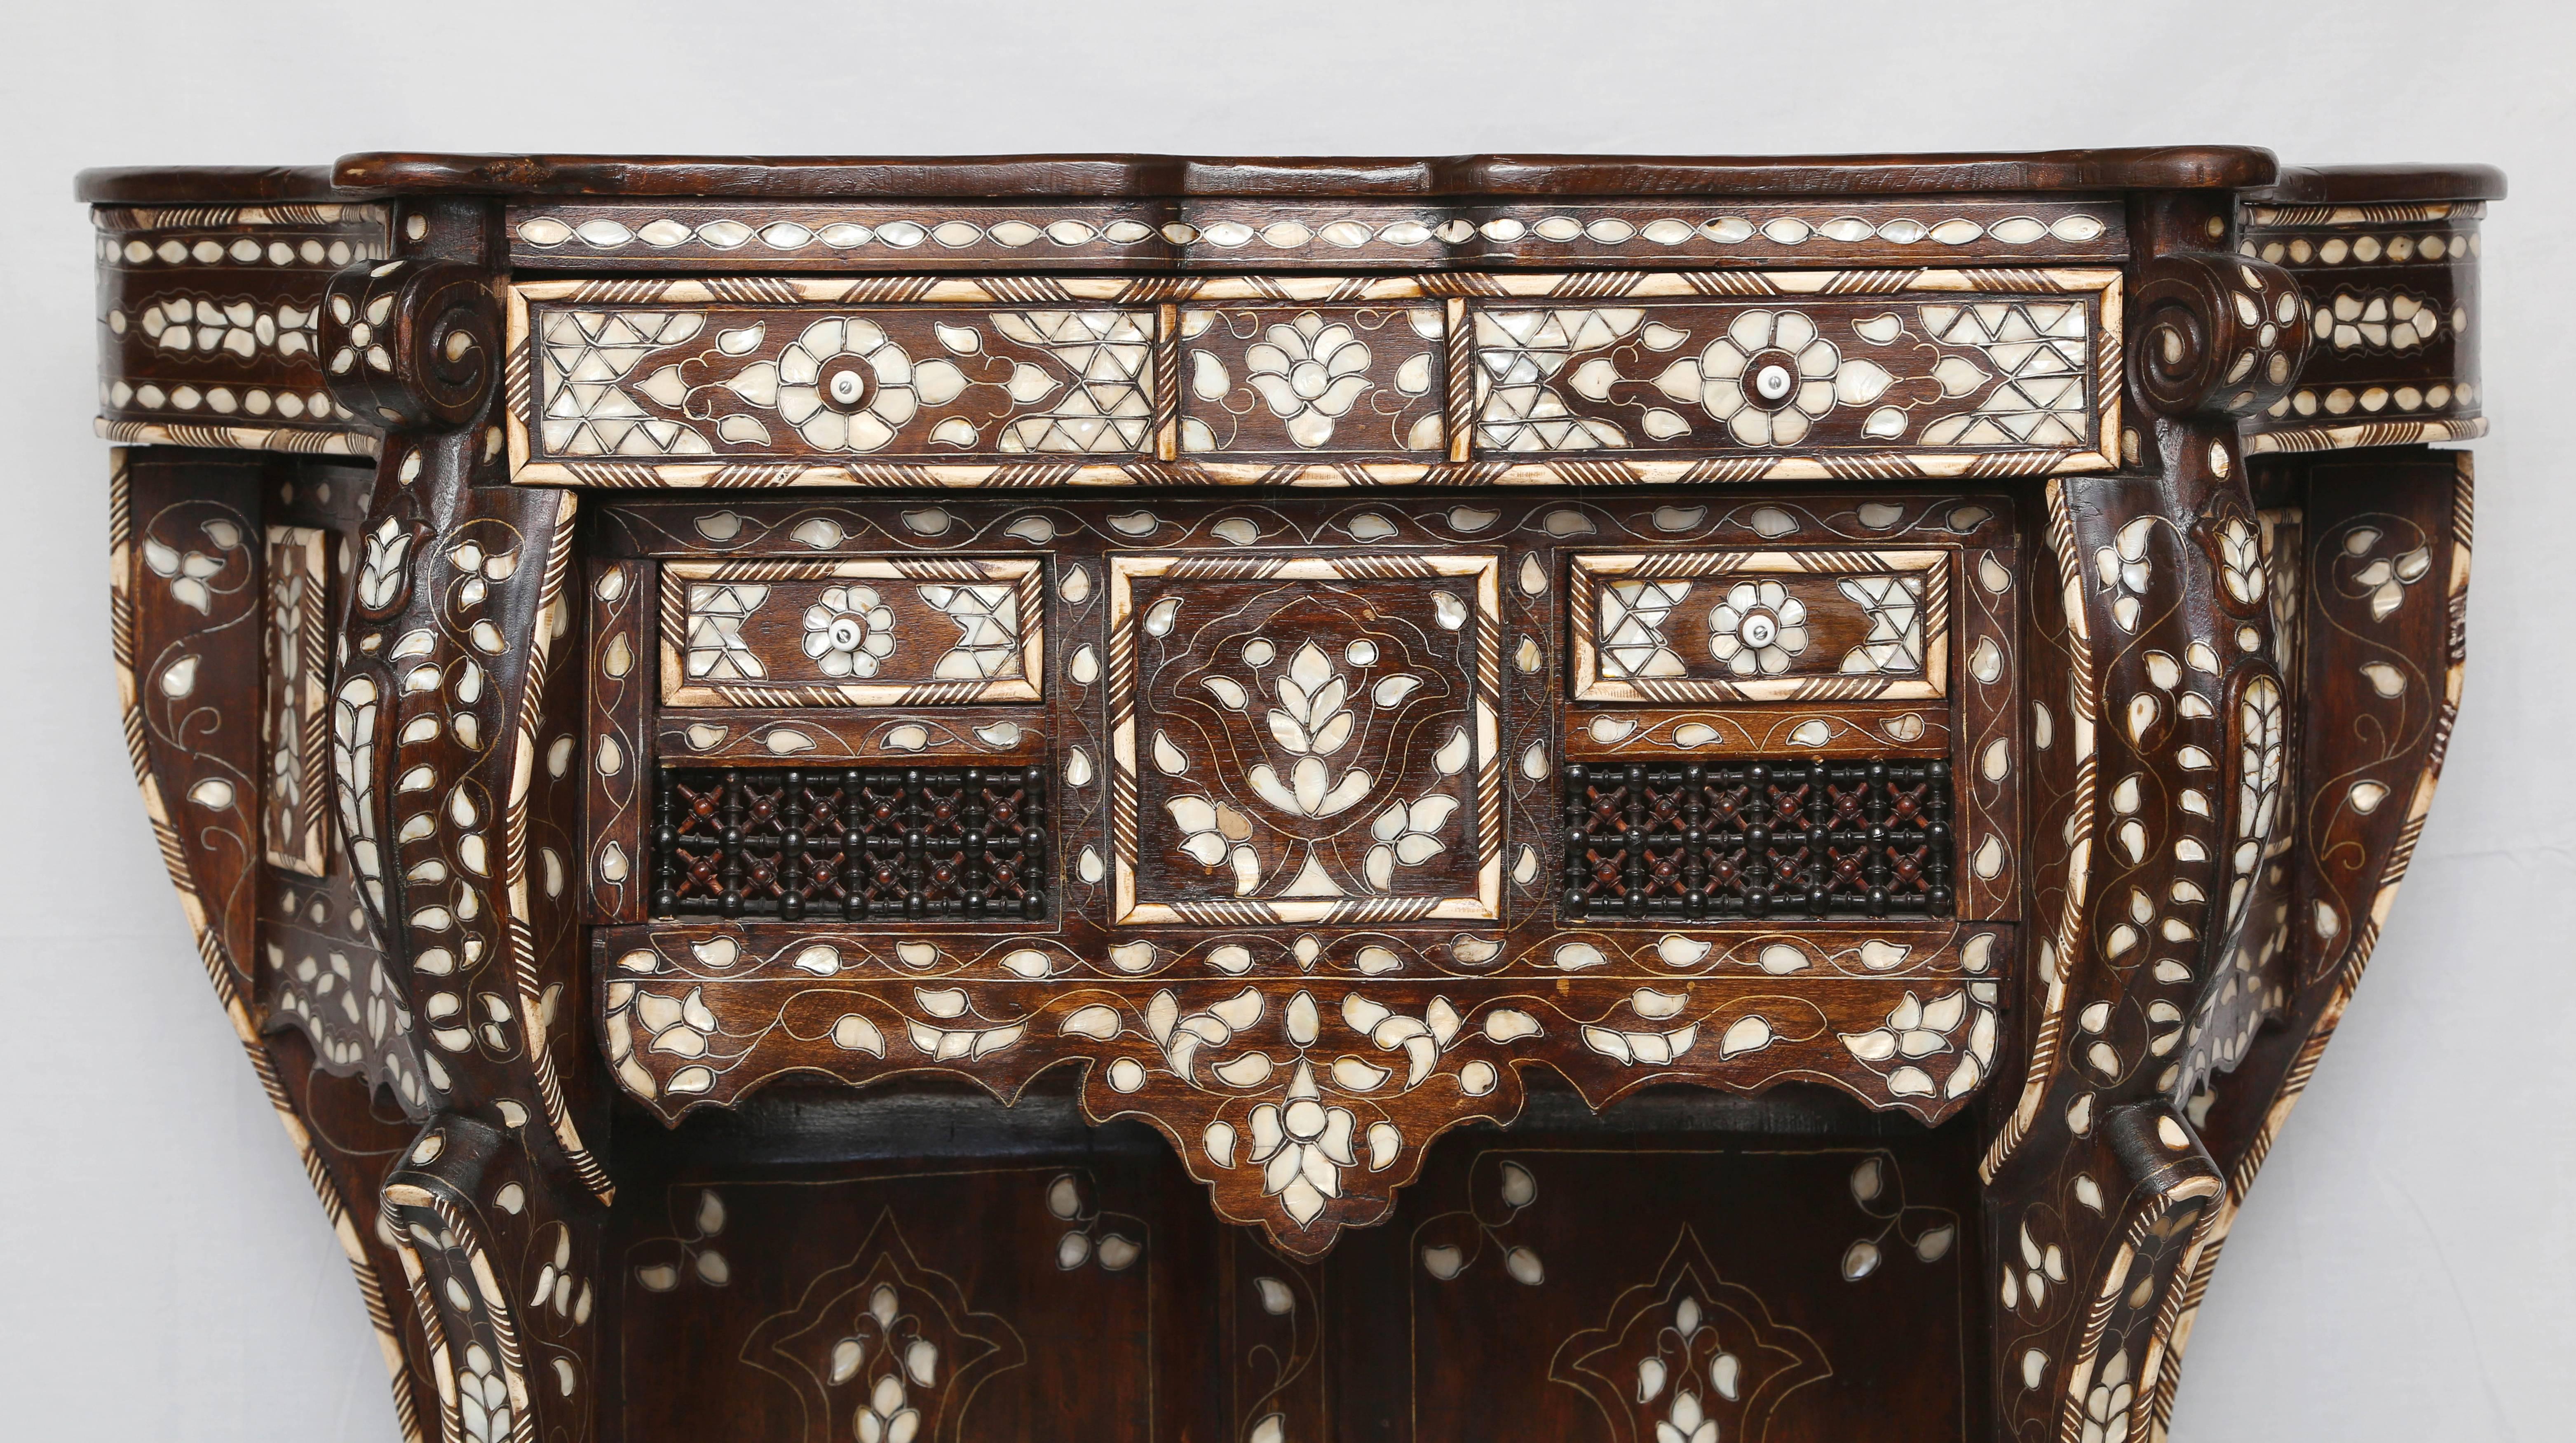 Superb Syrian mother-of-pearl inlaid console, the shaped top inlaid with floral tendrils, surmounting the conforming case having one over two drawers with ball and spindle detailing and shaped pendant apron rising on C-scroll legs conjoined by a